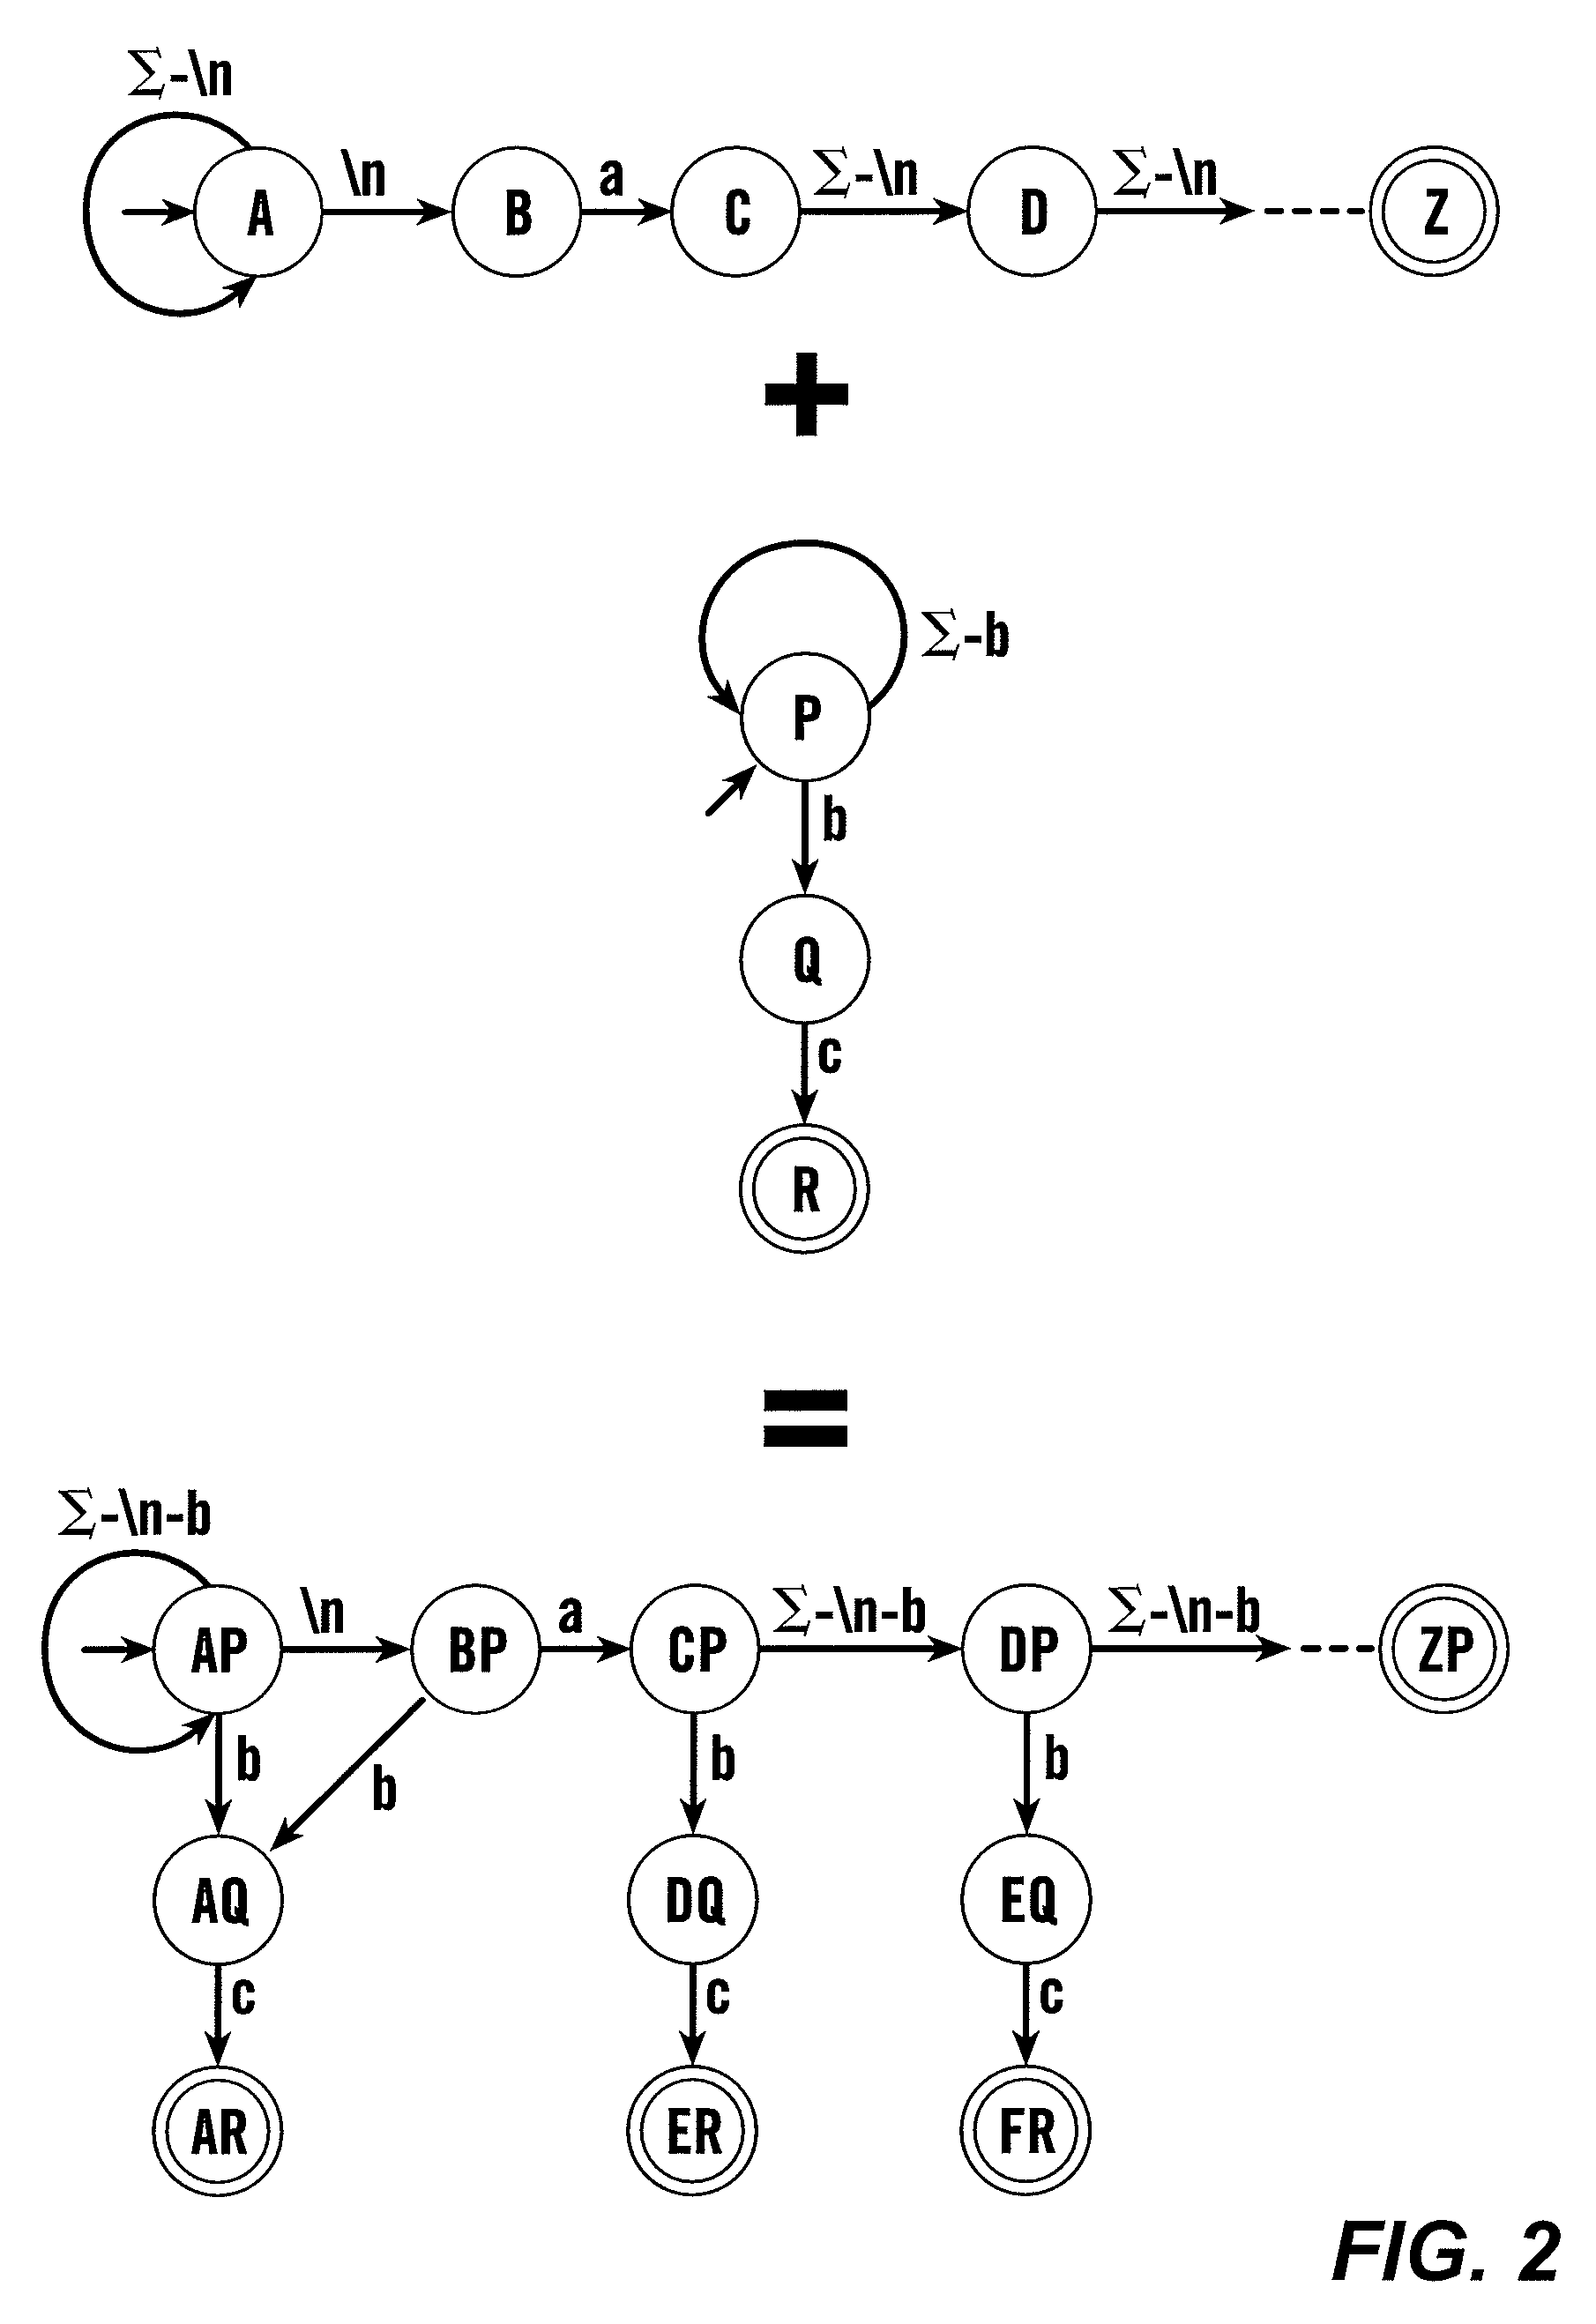 Extended finite state automata and systems and methods for recognizing patterns in a data stream using extended finite state automata